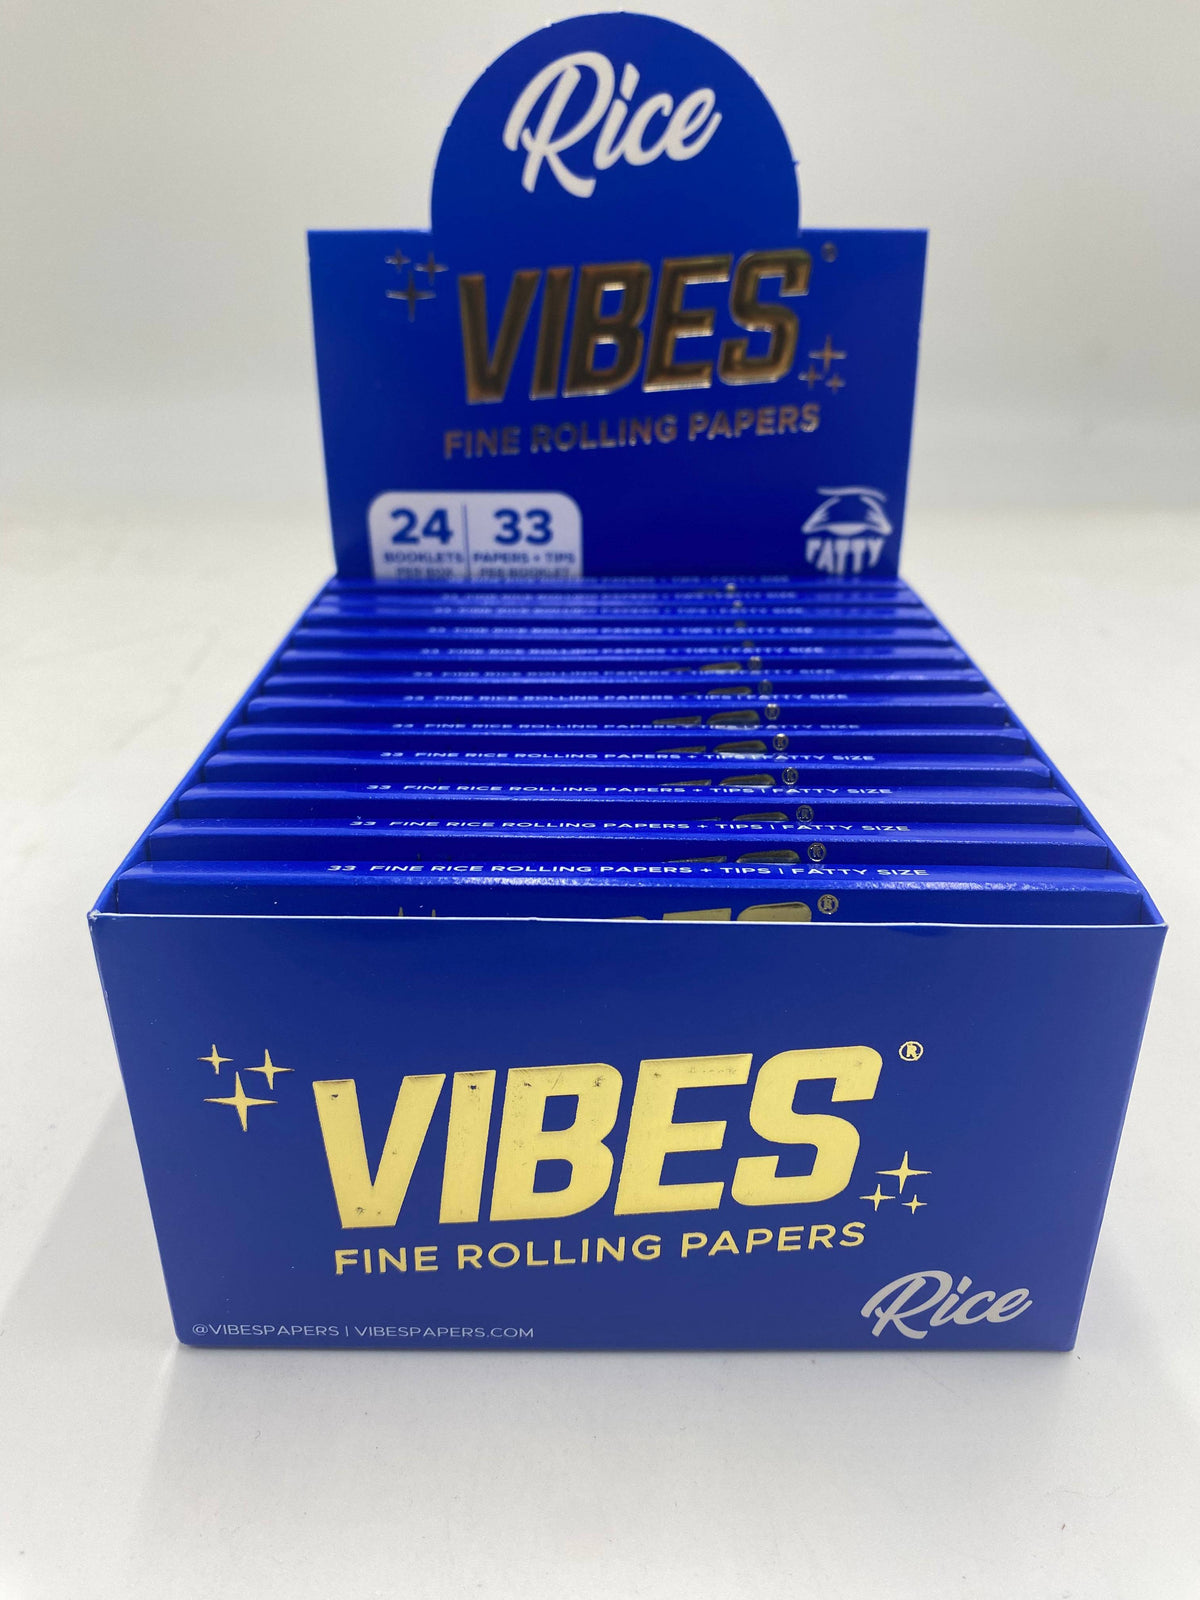 Vibes King Size Fatty Rice Rolling Papers  W/ Tips  24ct Box 33 LPB